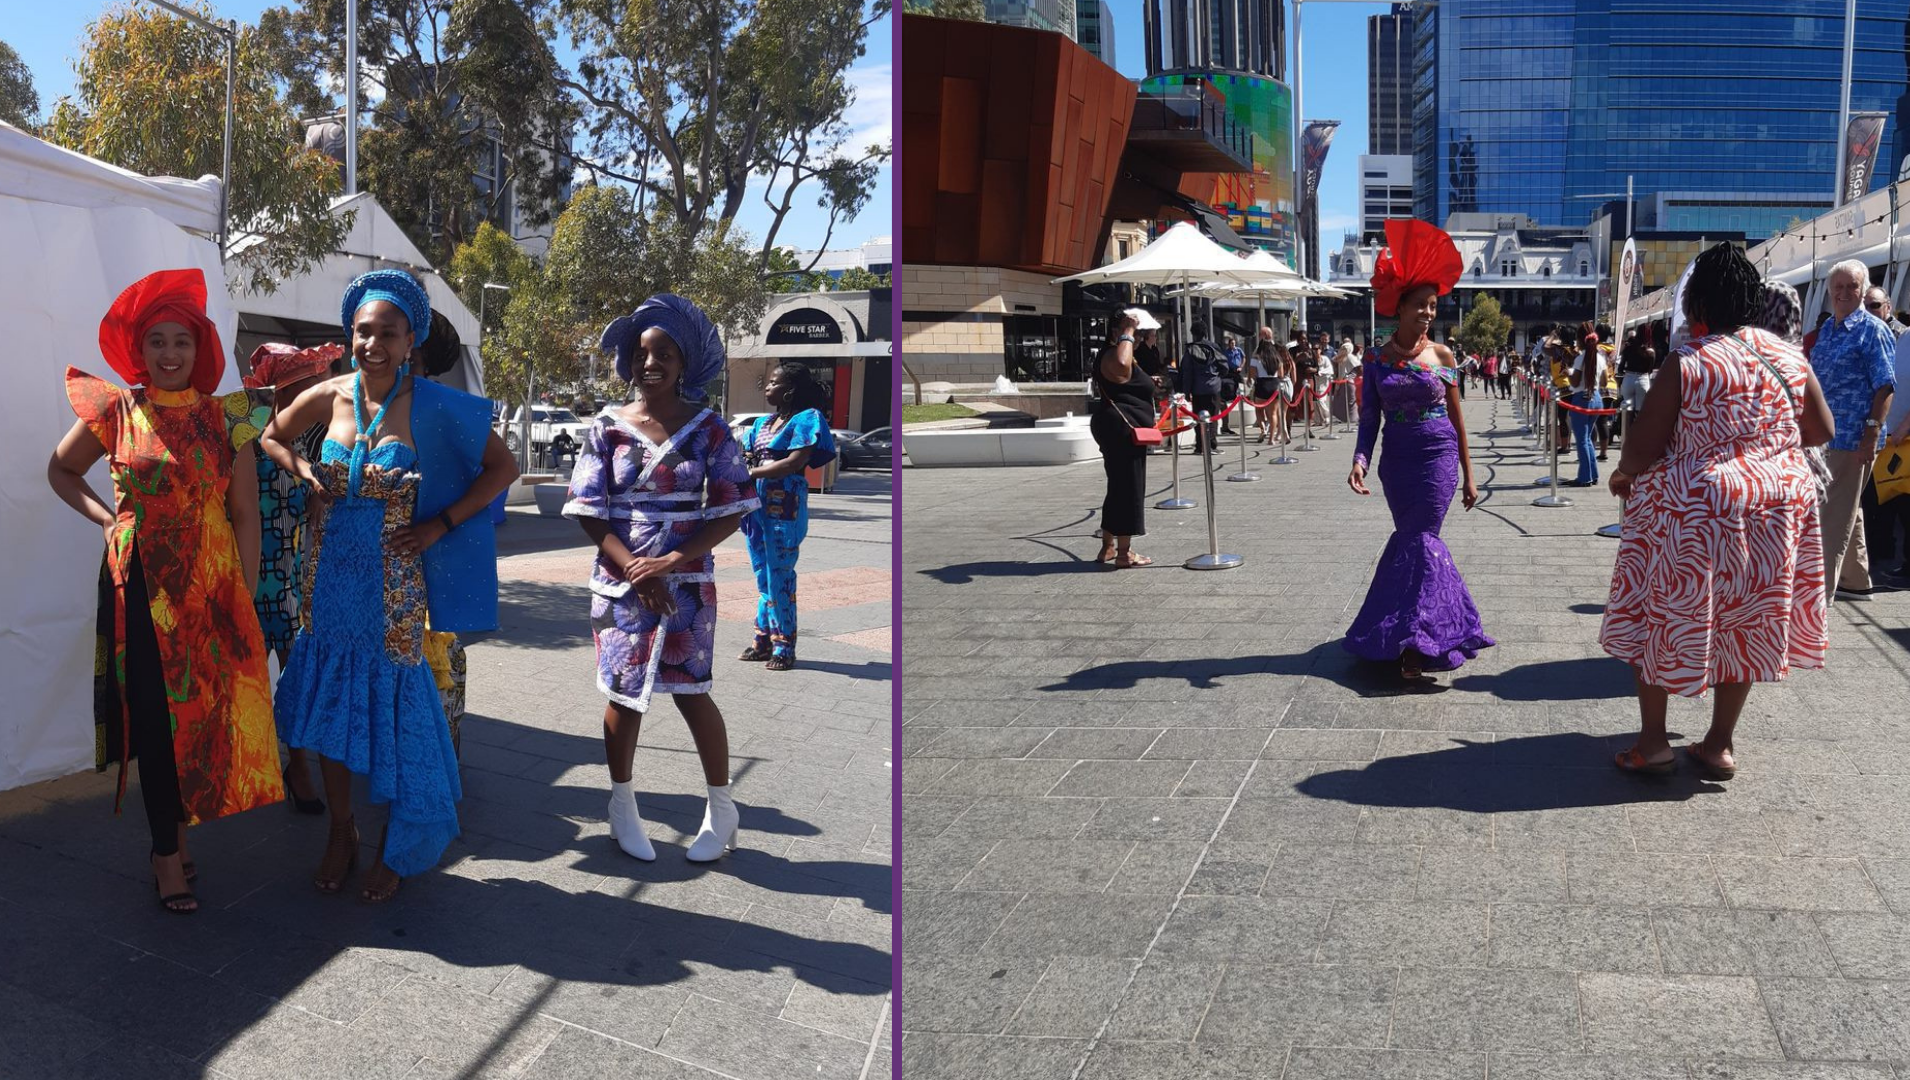 Participants and models from the Yagan Square event